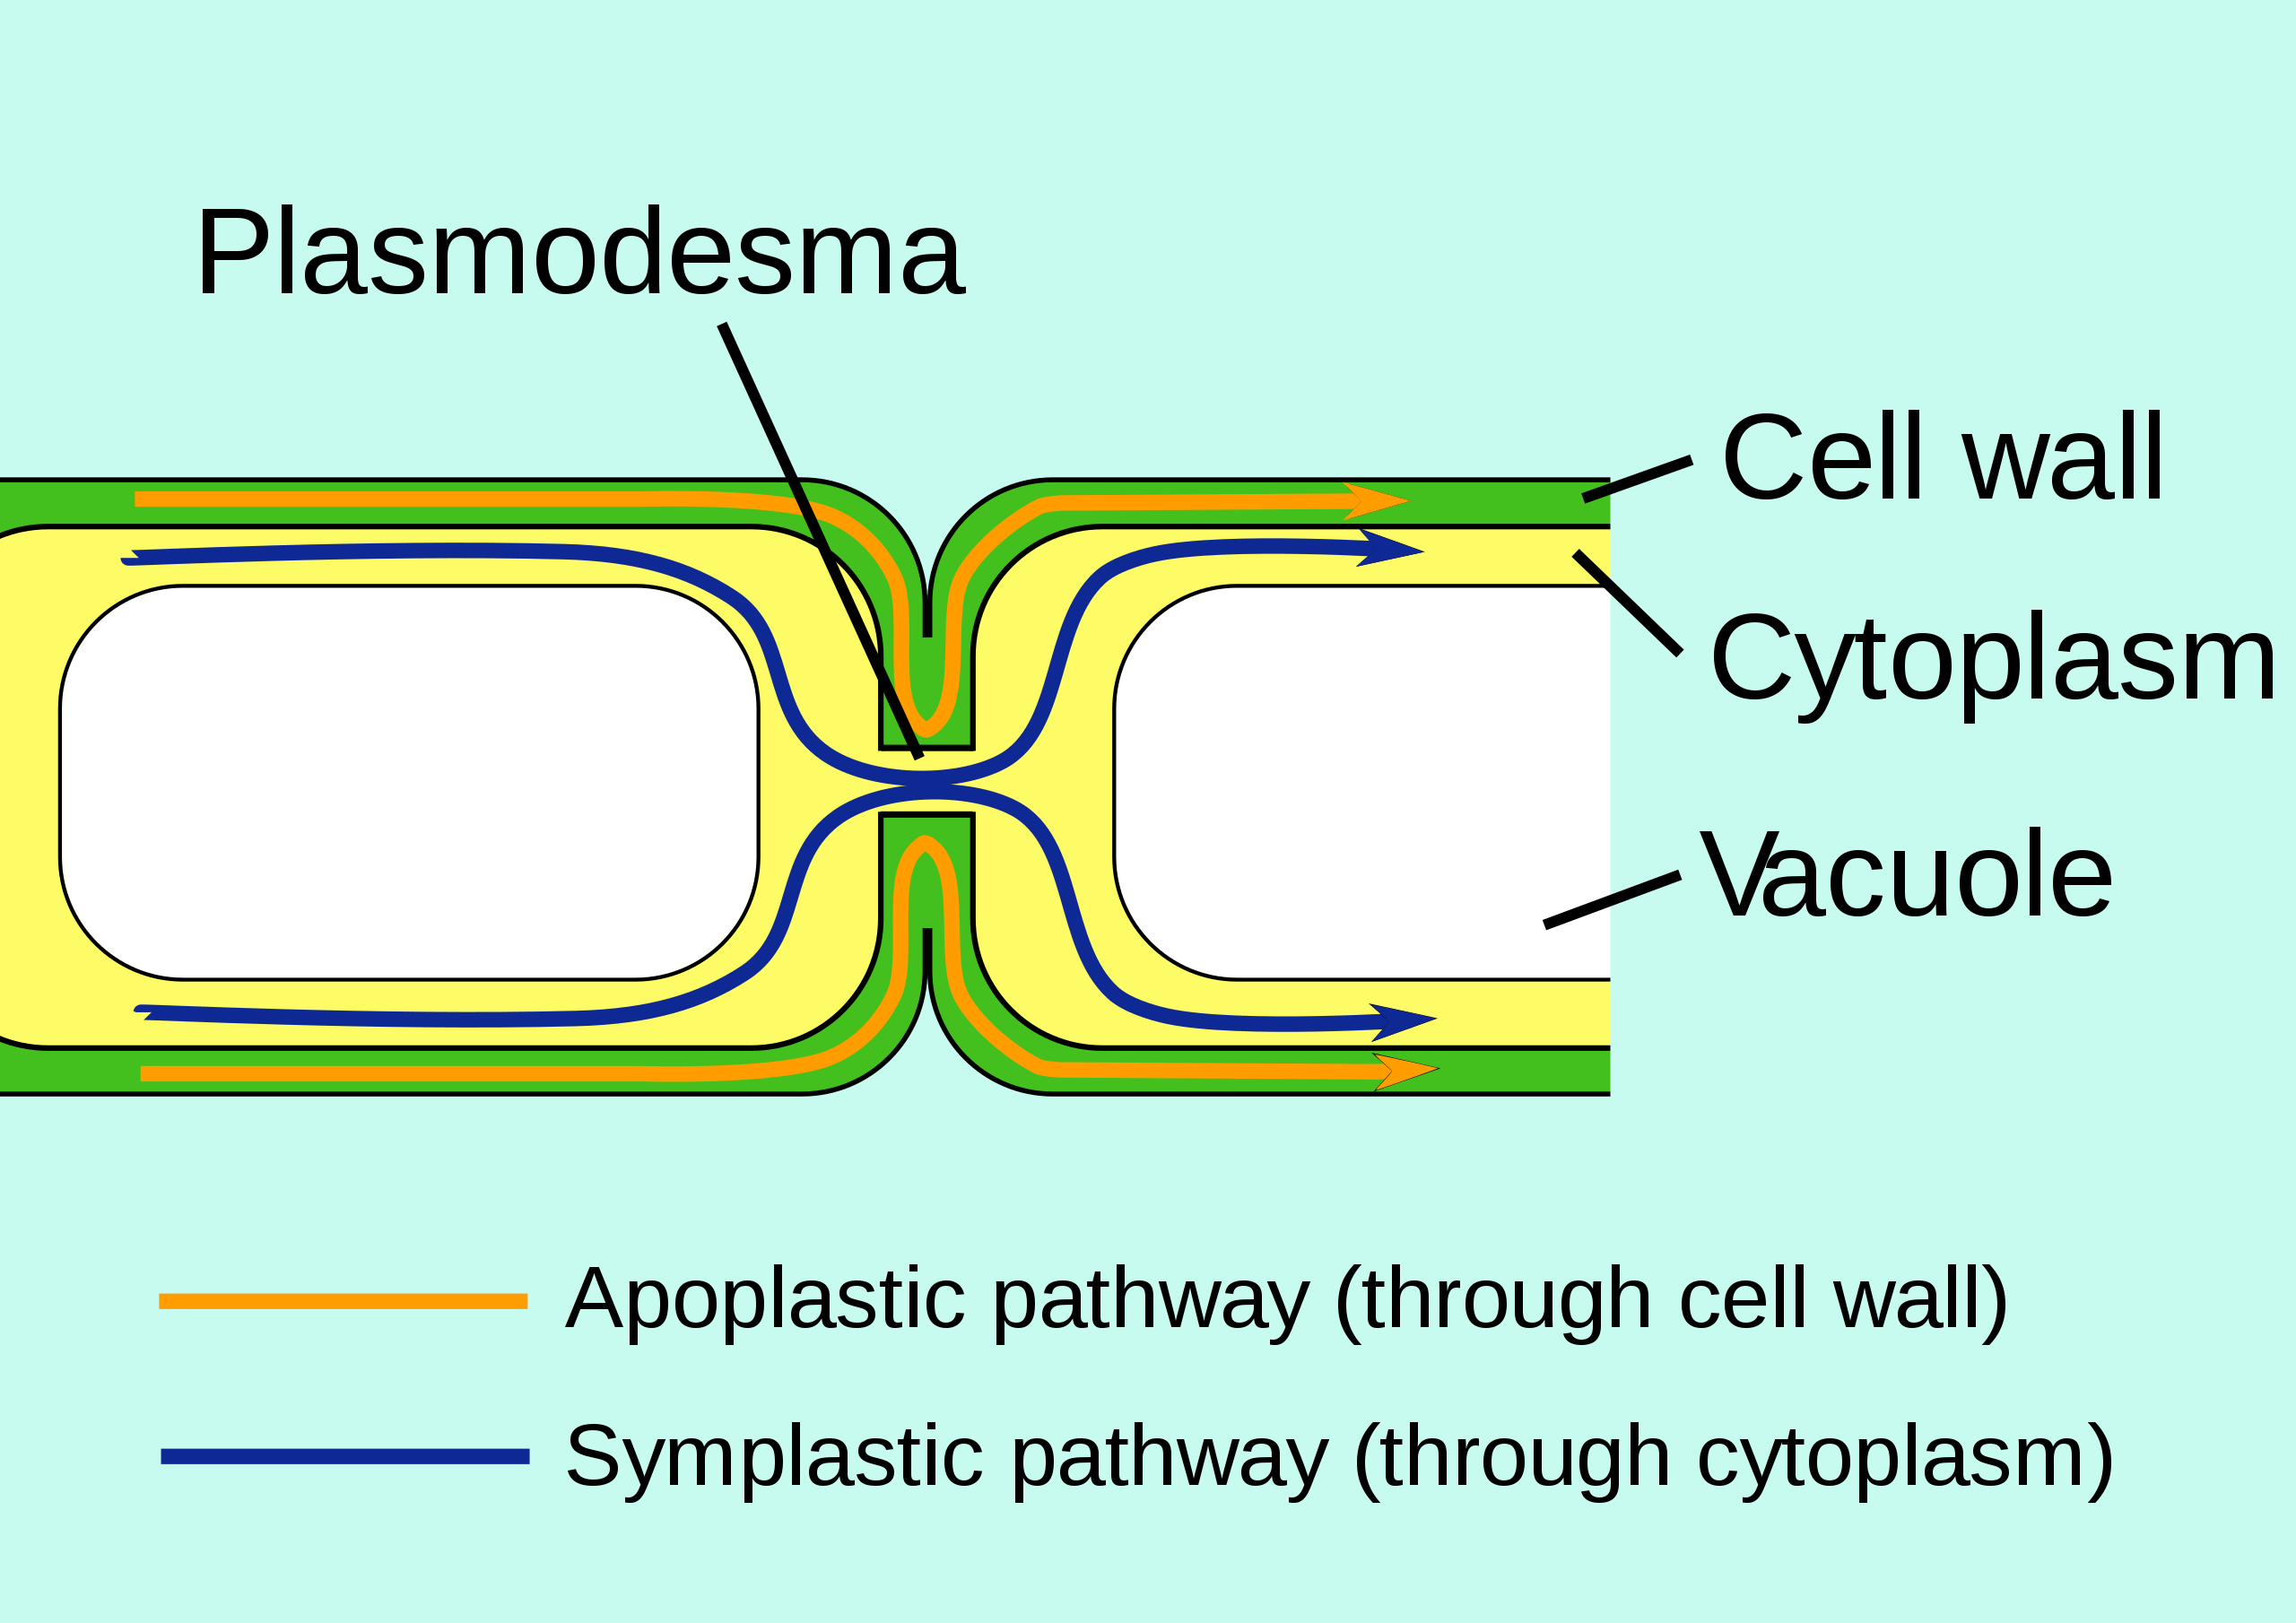 Plasmodesmata allow molecules to travel between plant cells through the symplastic pathway.